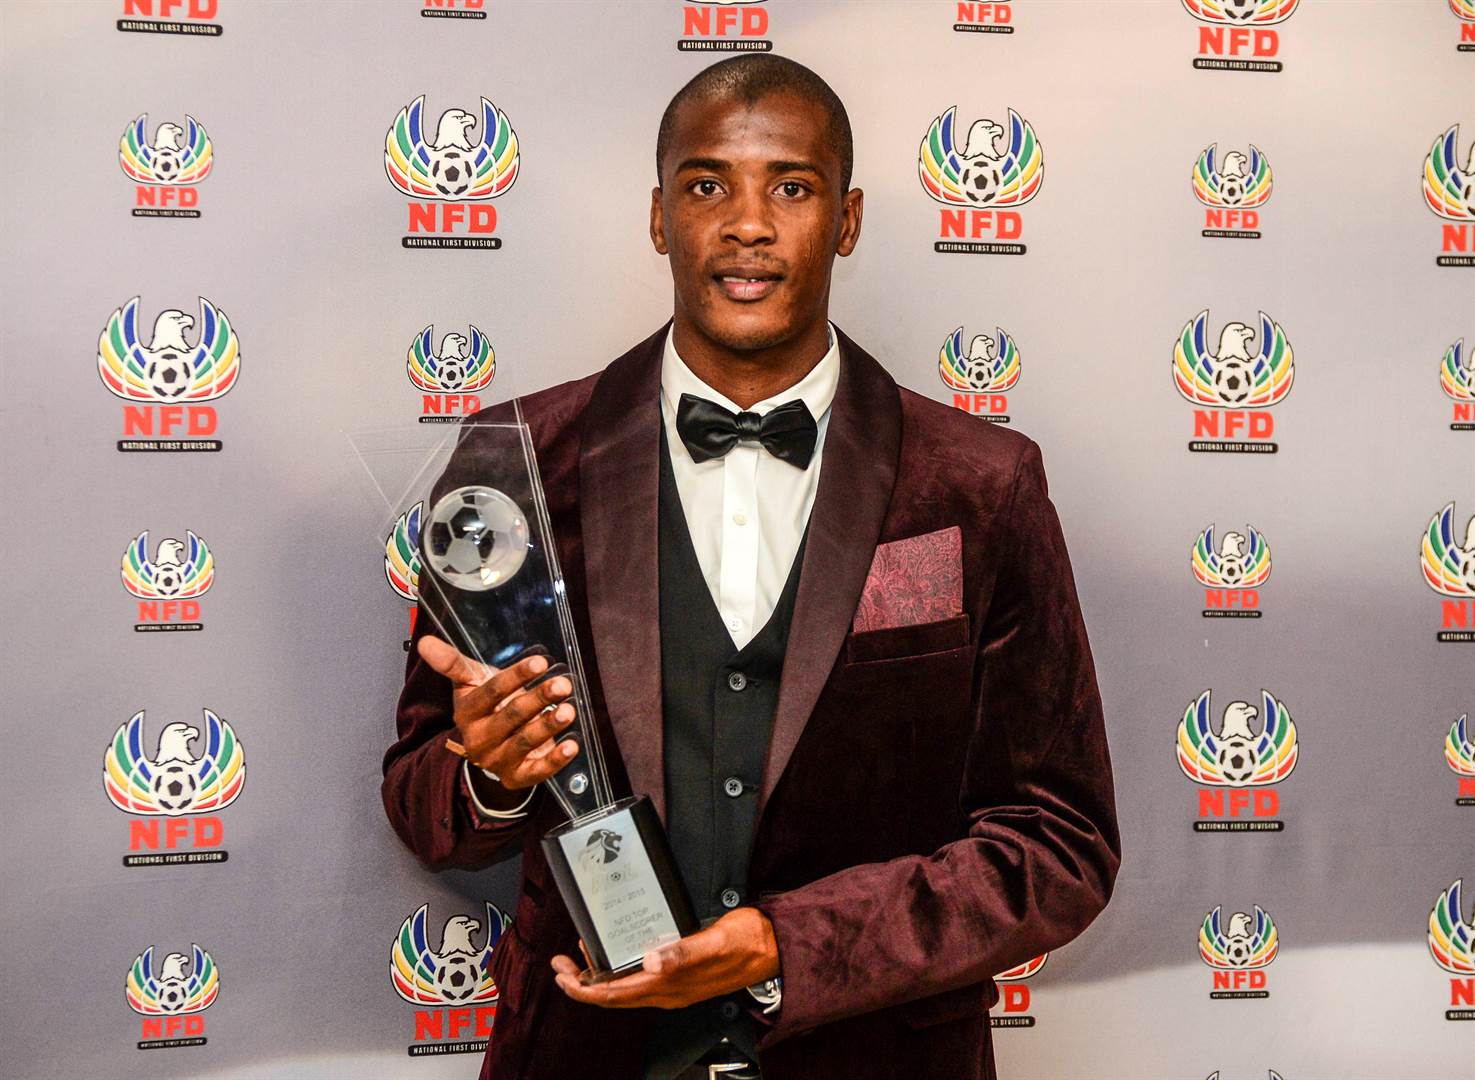 Ace Bhengu scored 22 goals for Thanda Royal Zulu in the 2014/15 season, which remains a record in the GladAfrica Championship